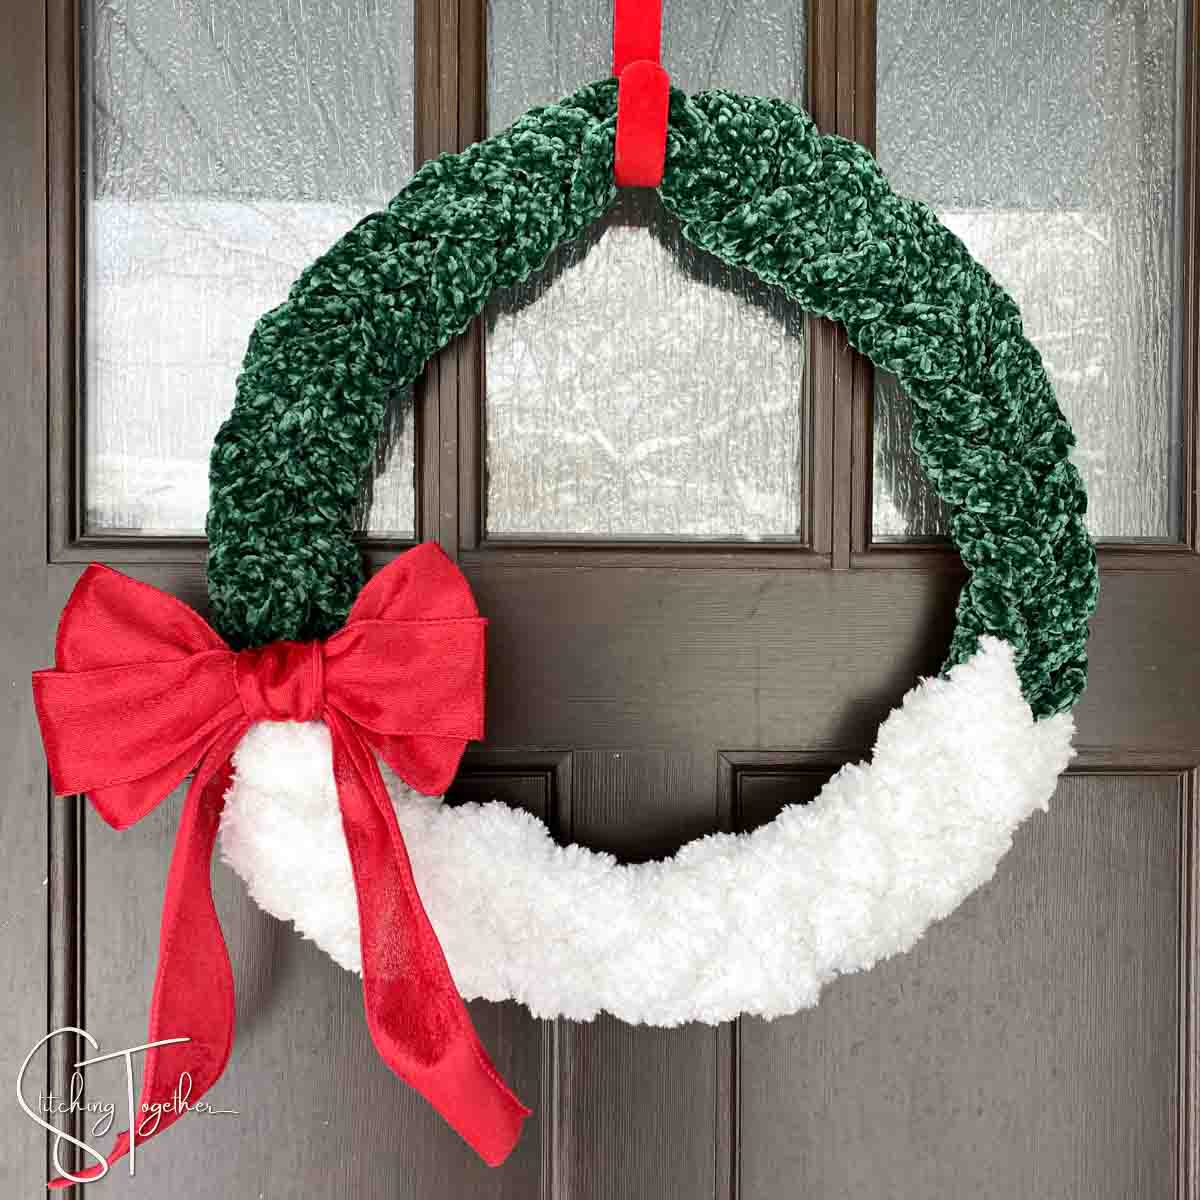 green and white crochet winter wreath with a large red bow hanging on a front door by a red wreath hanger